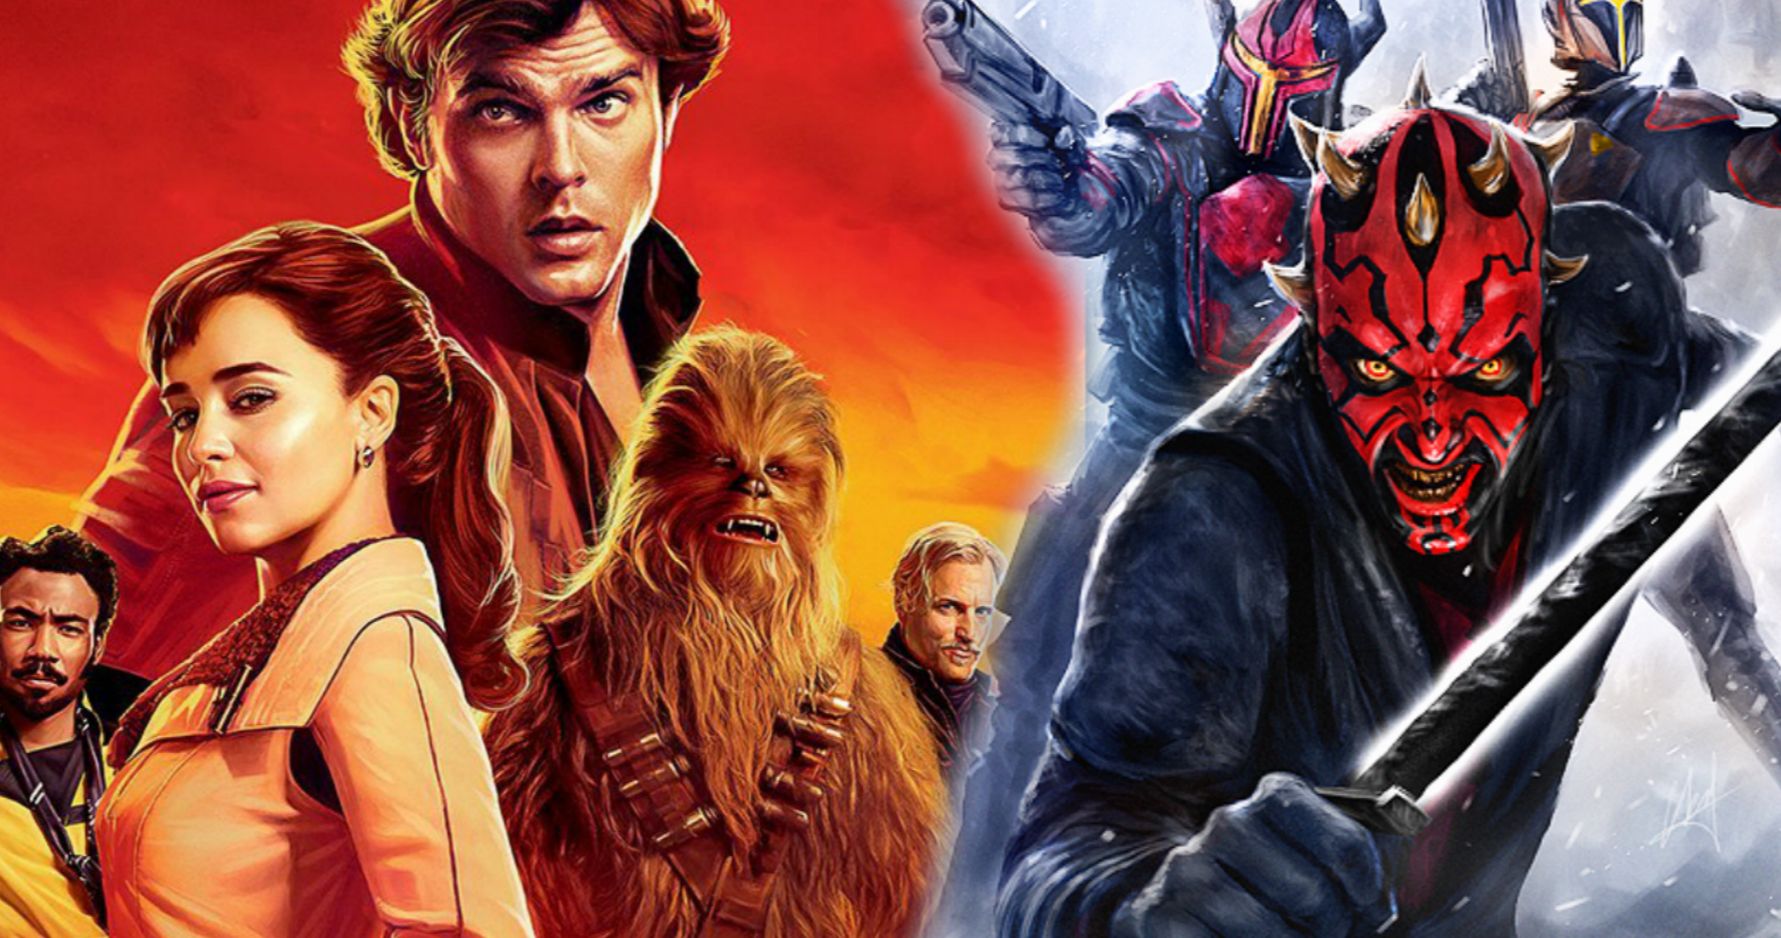 Is Disney+ Planning a Solo Spin-Off Movie Instead of a True Sequel?